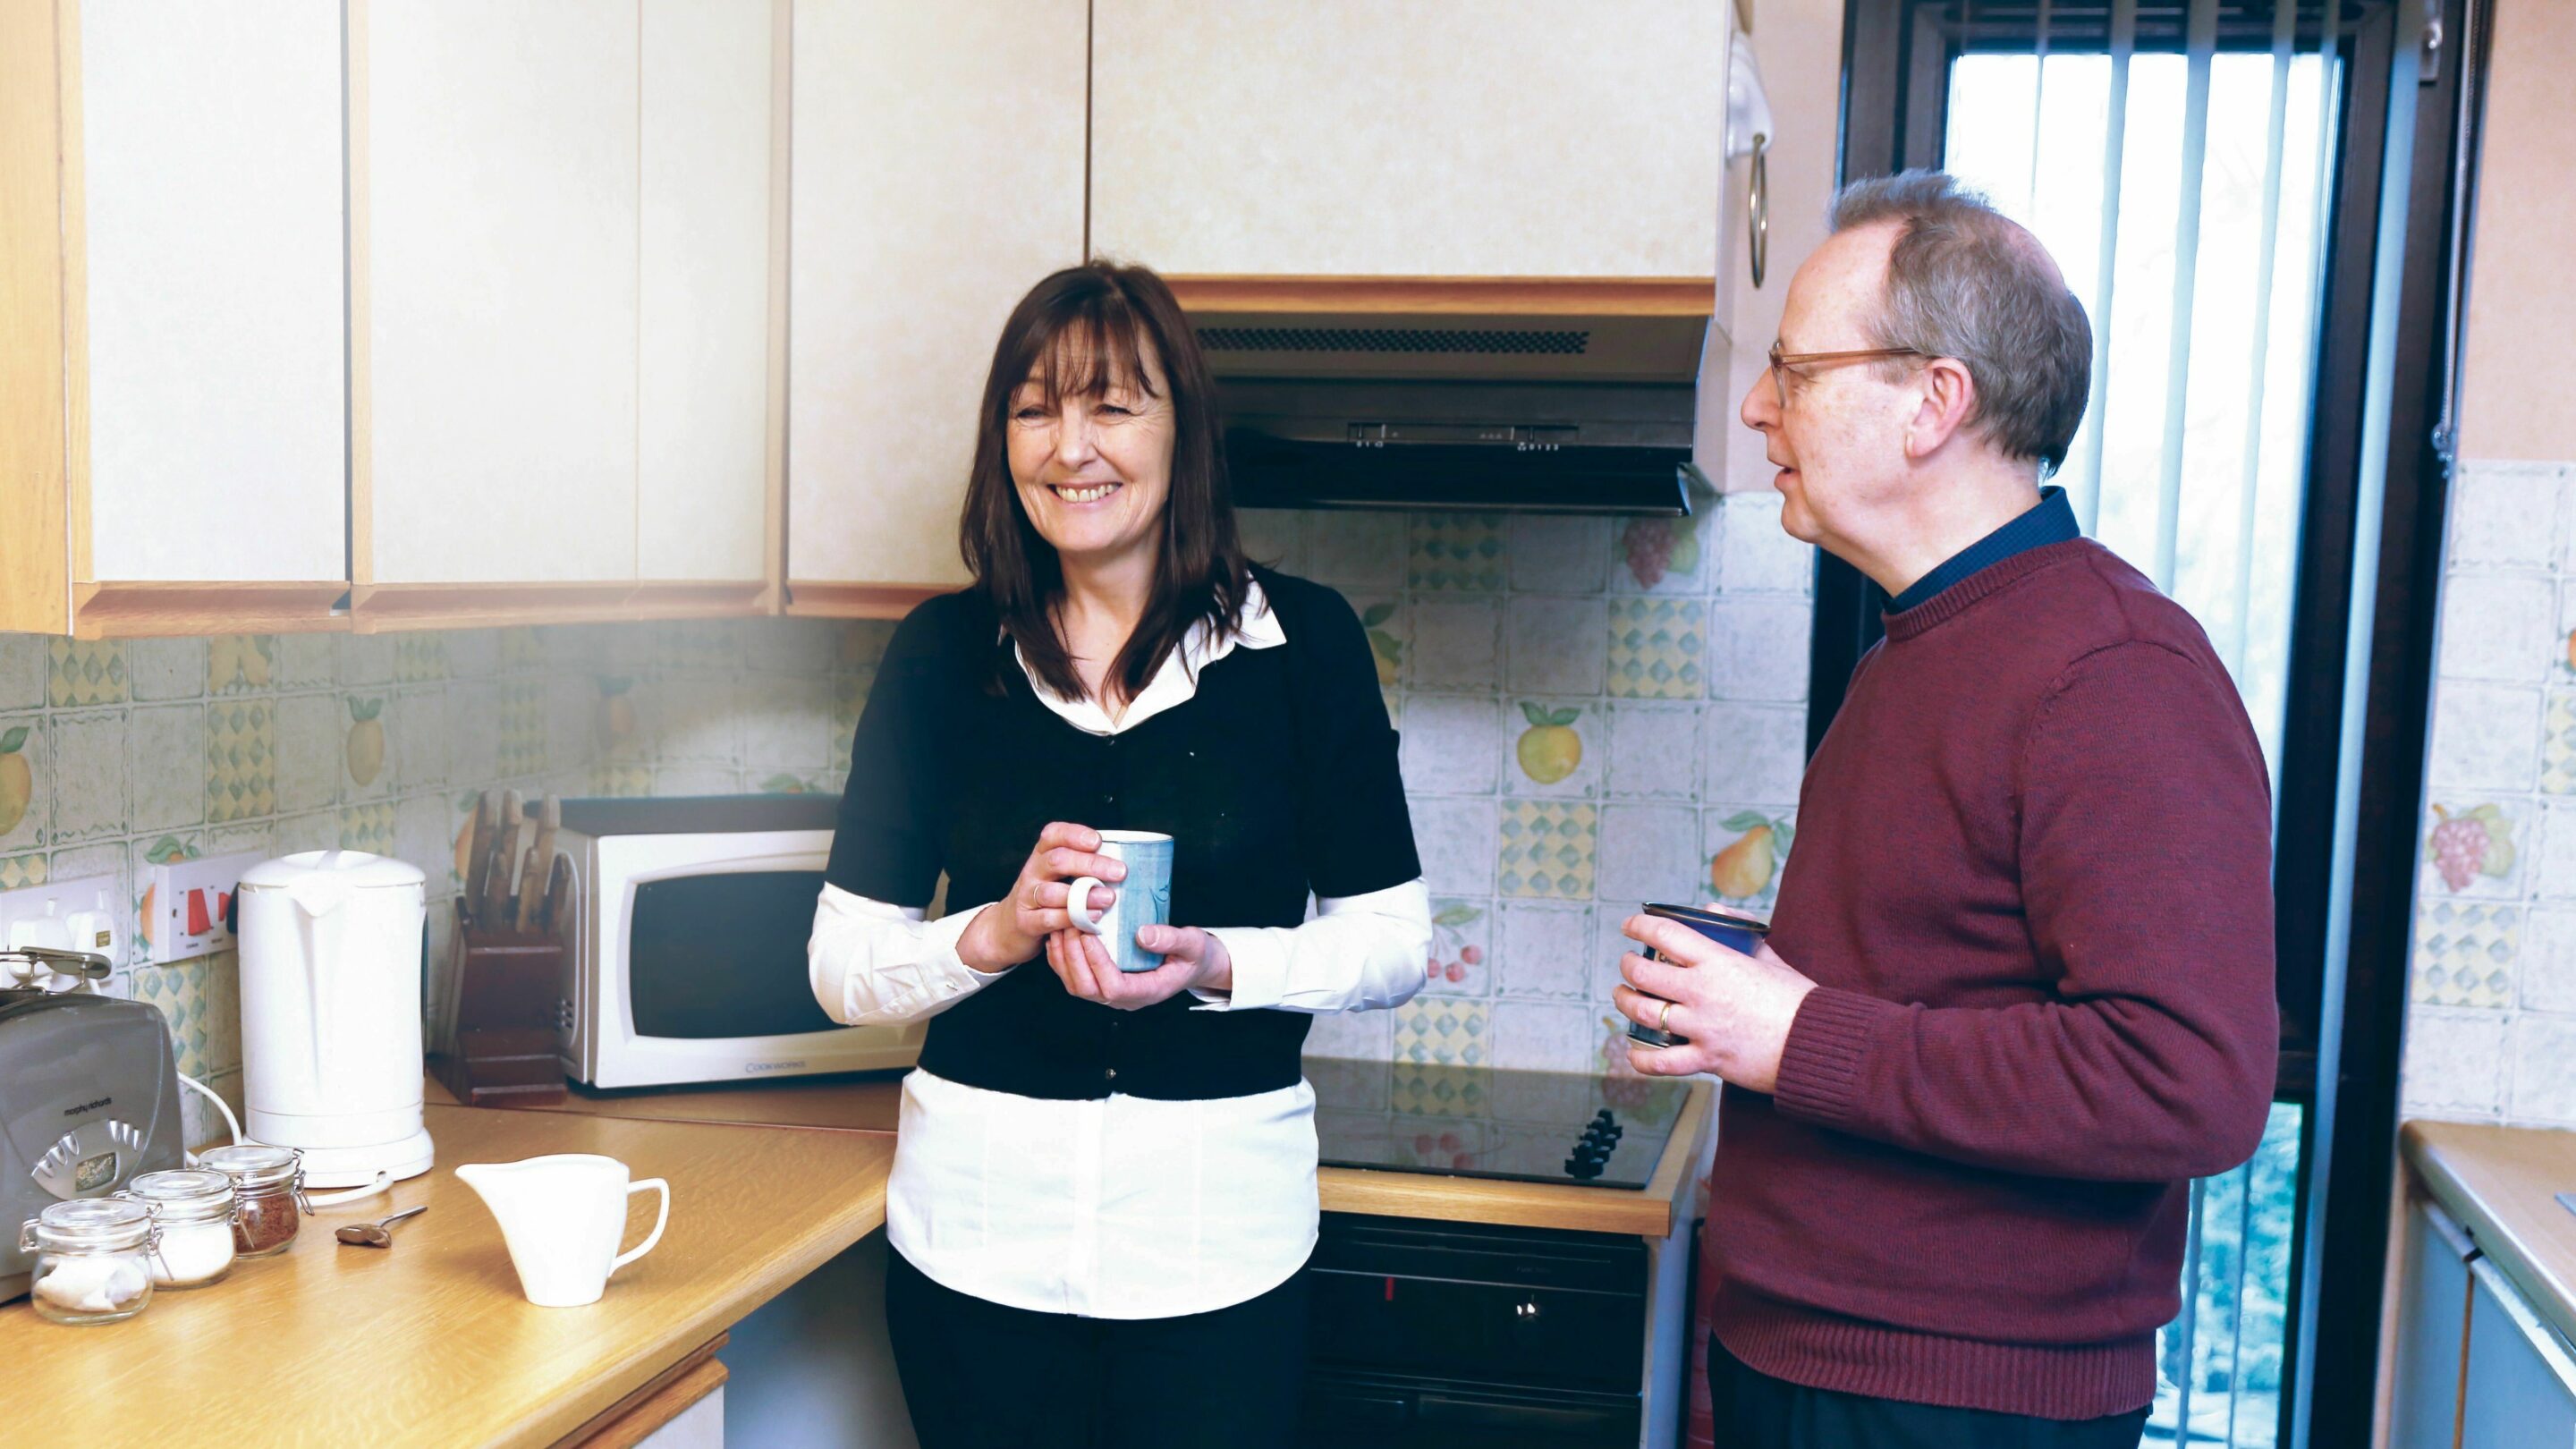 Older male and female stood in the kitchen chatting while holding cups of tea and smiling.